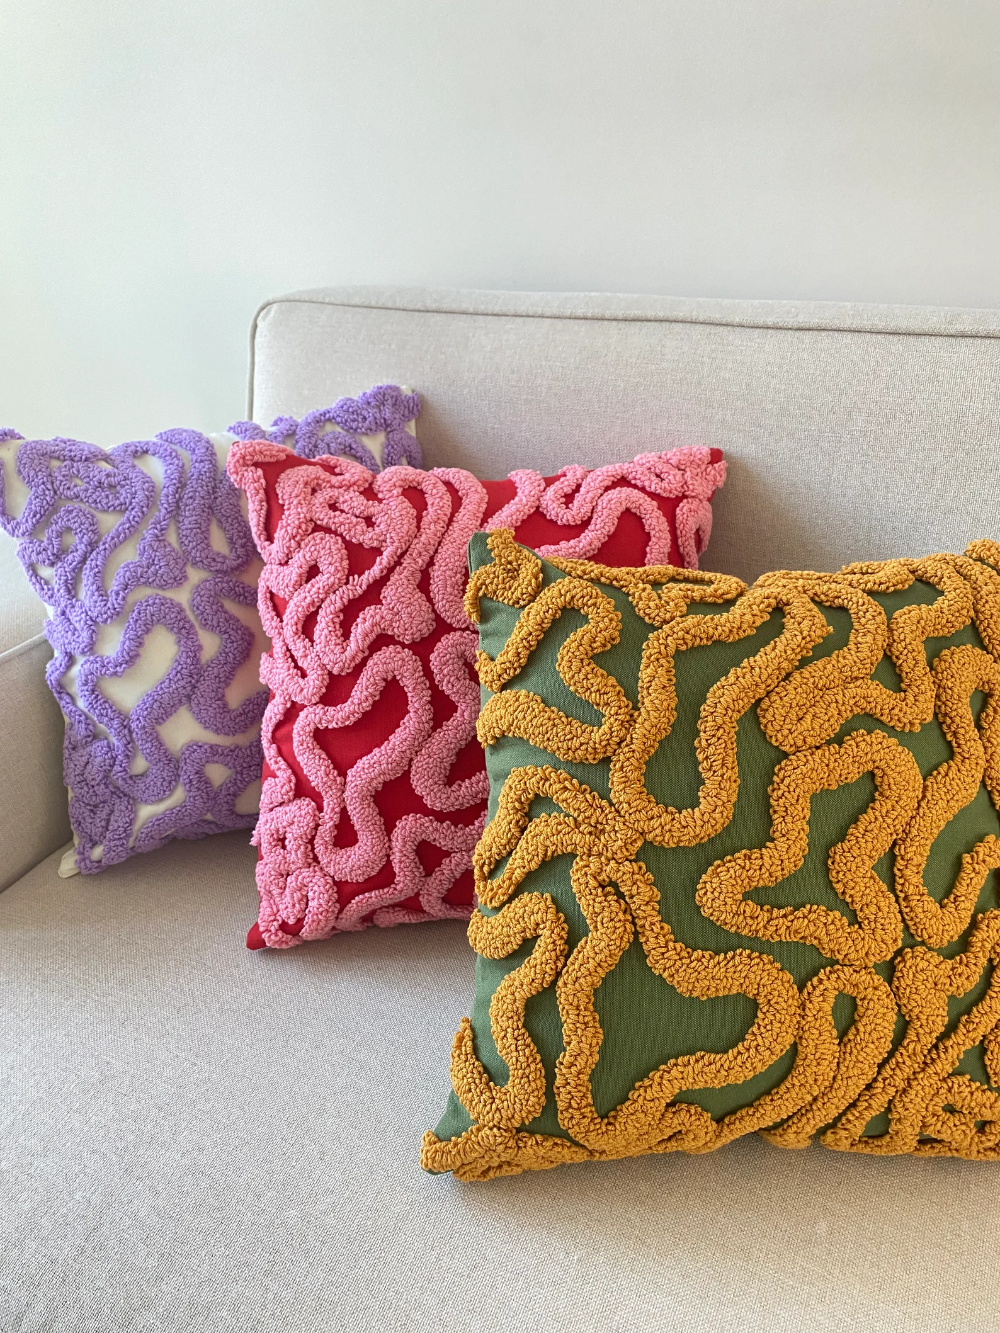 Custom Pillows: Adding Personal Touches to Your Home Decor